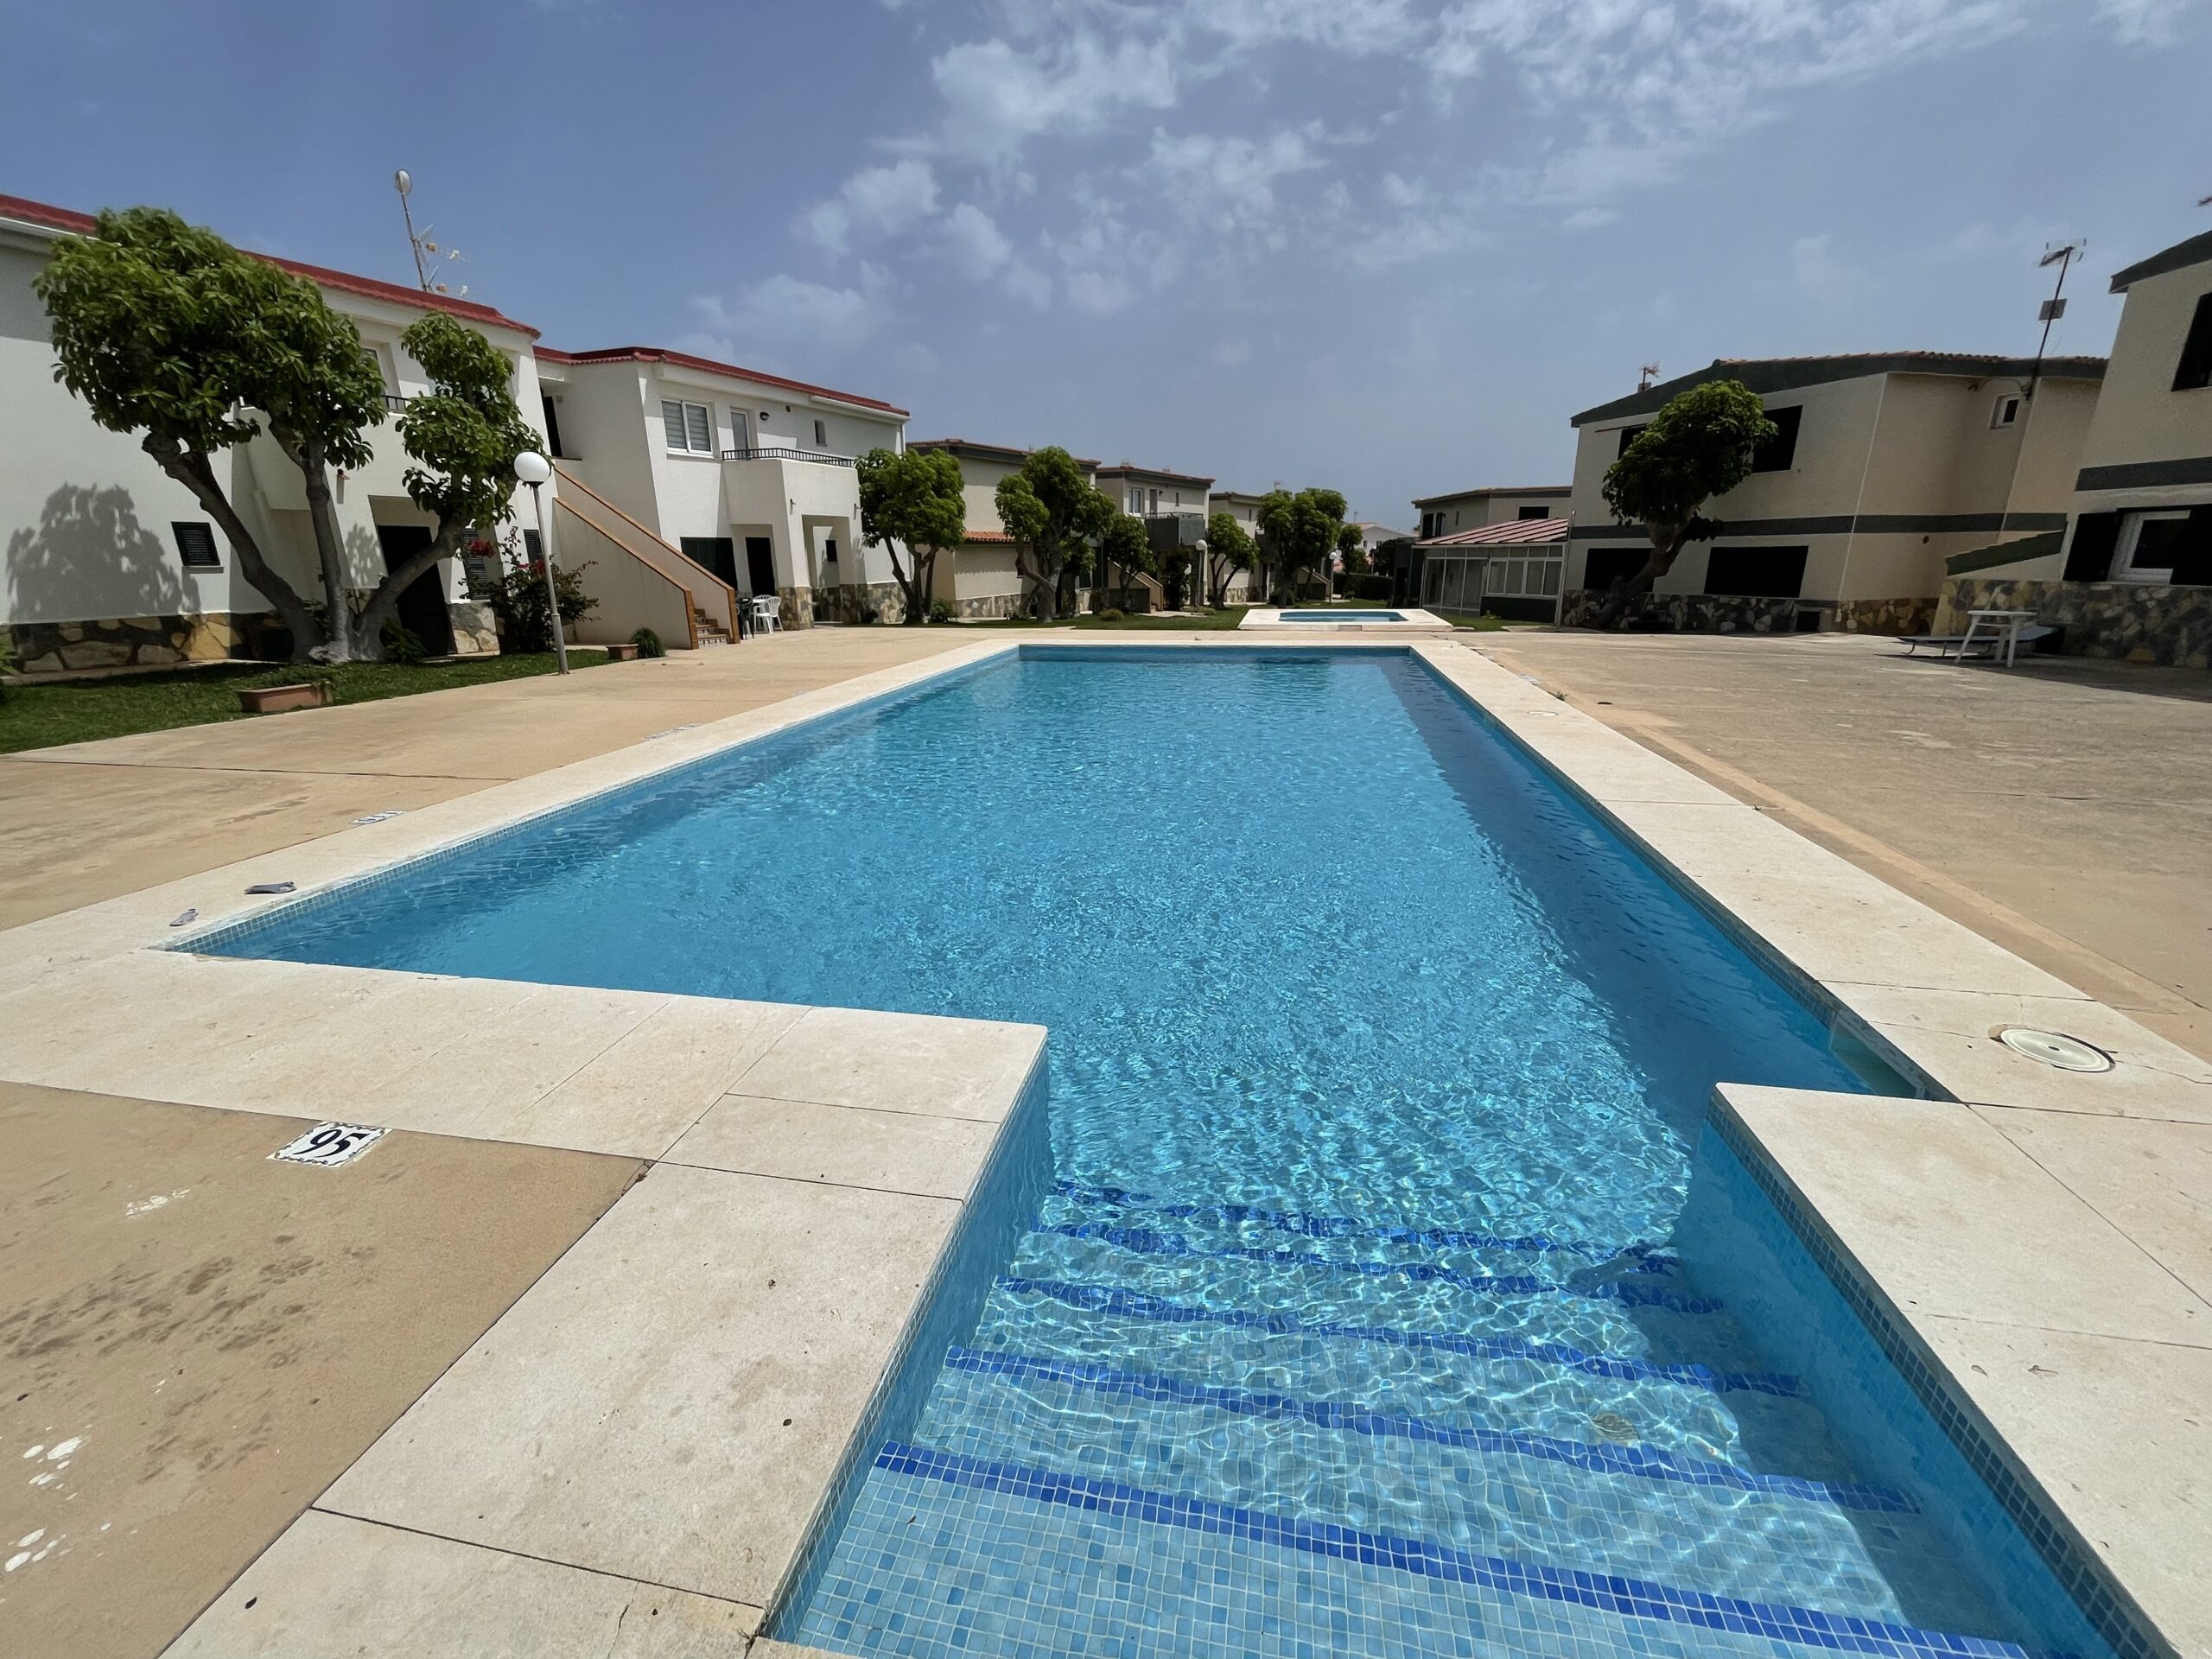 Ground floor apartment with garden and pool – FORCAT.